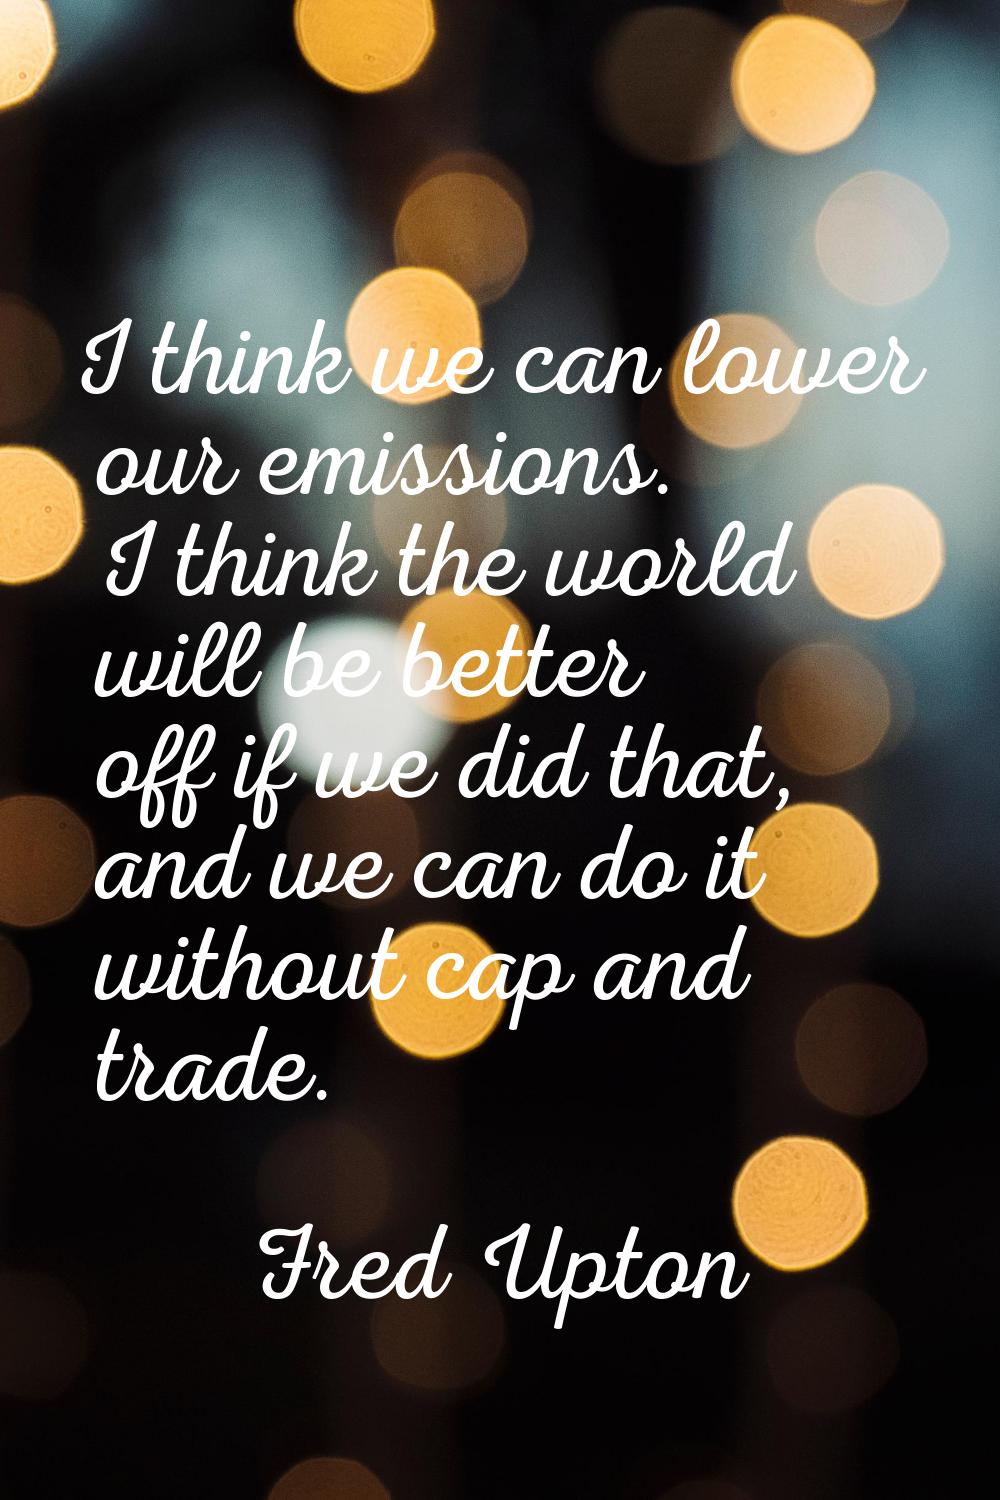 I think we can lower our emissions. I think the world will be better off if we did that, and we can